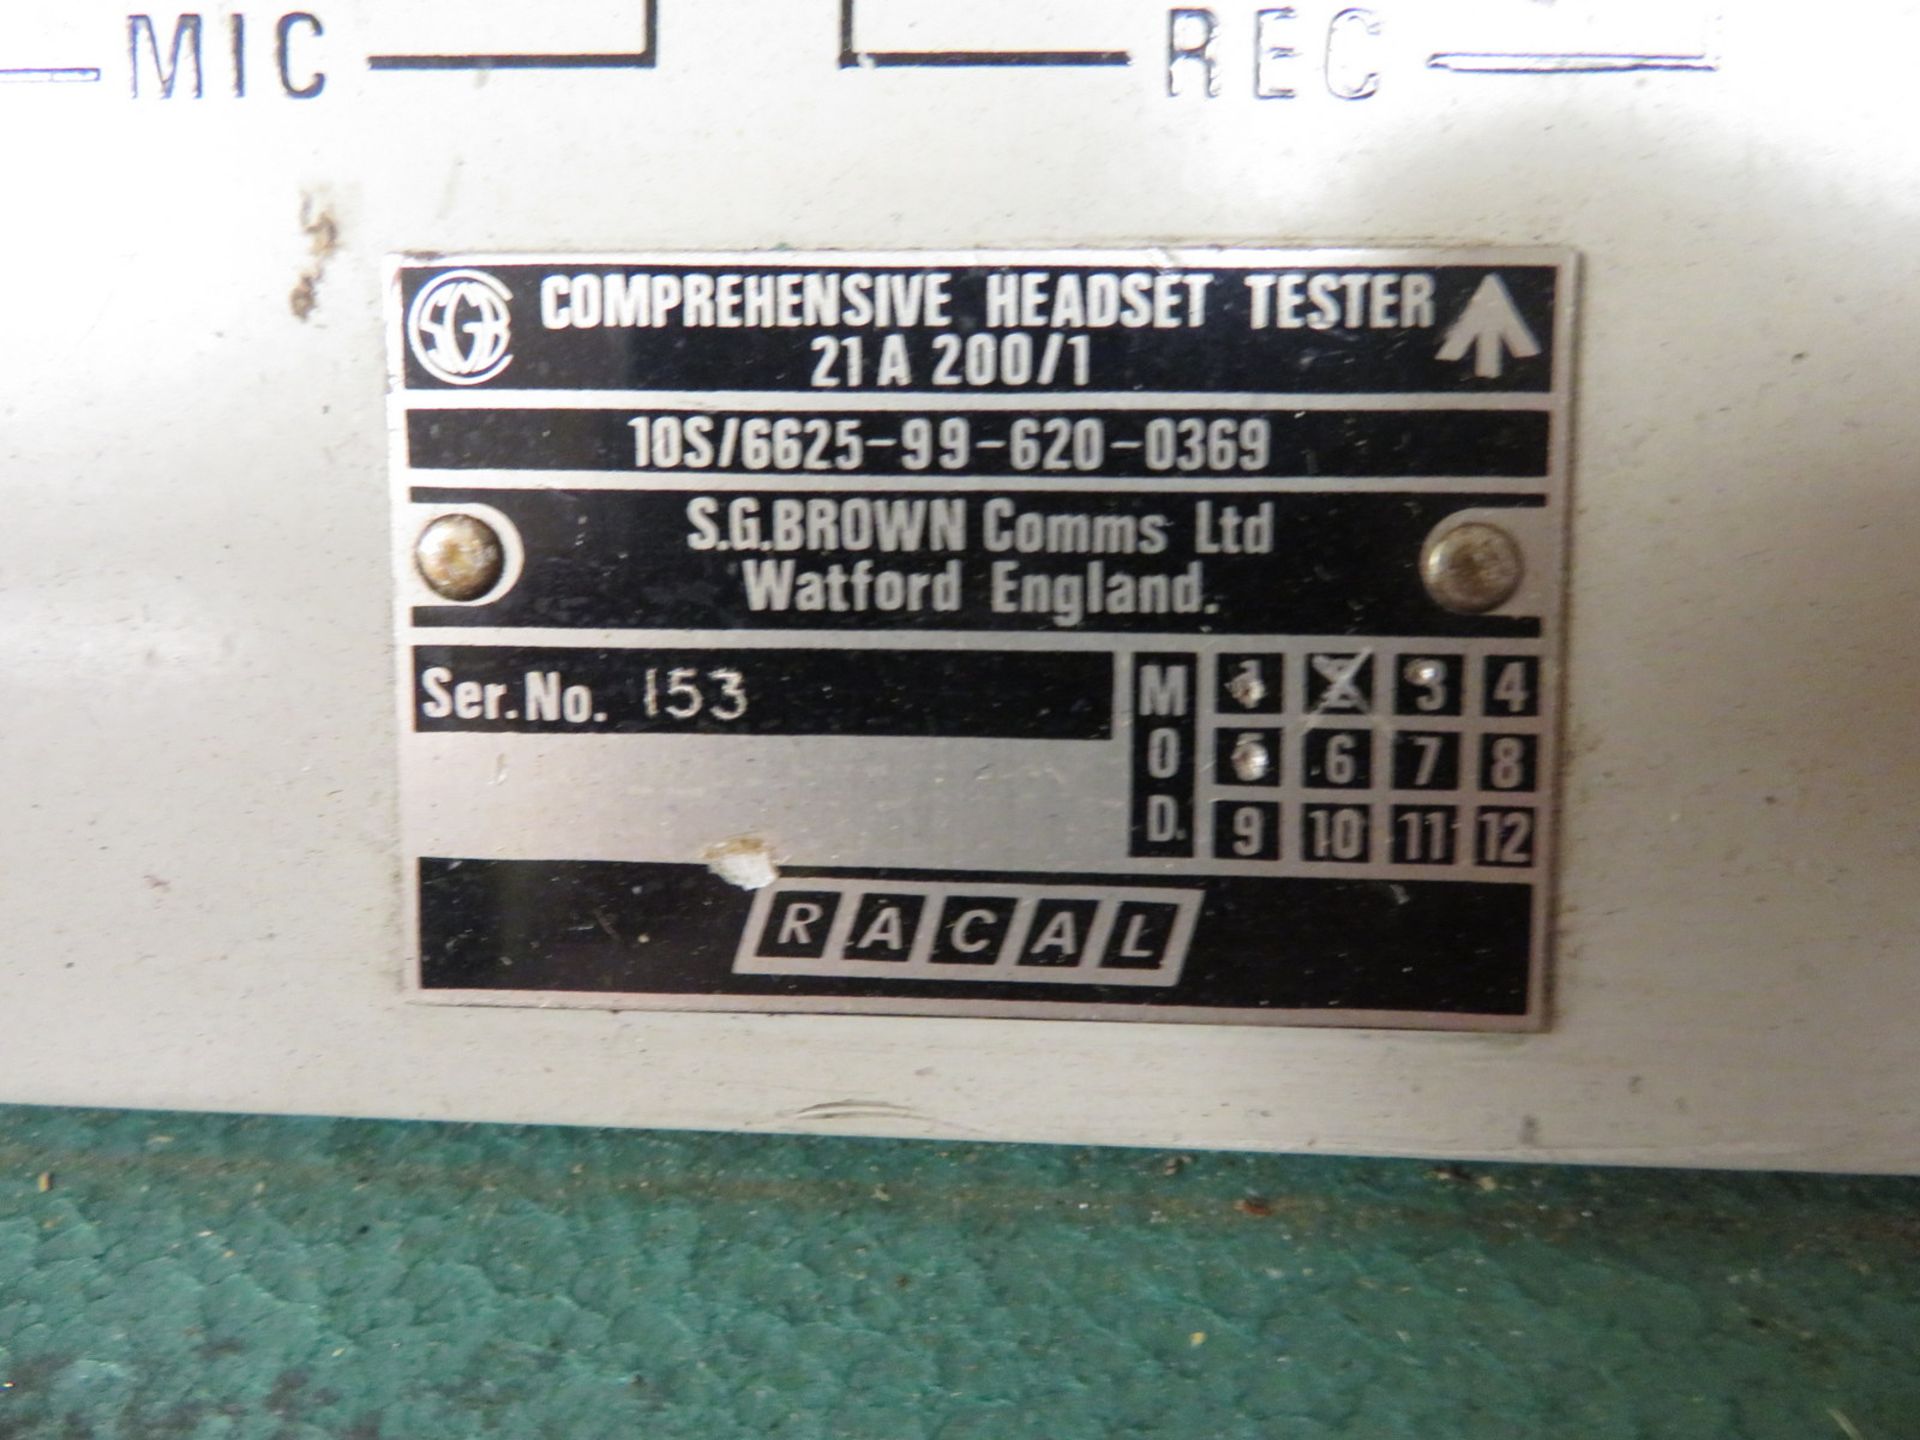 Racal Acoustics comprehensive headset tester 21 A 200/2 - Image 5 of 5